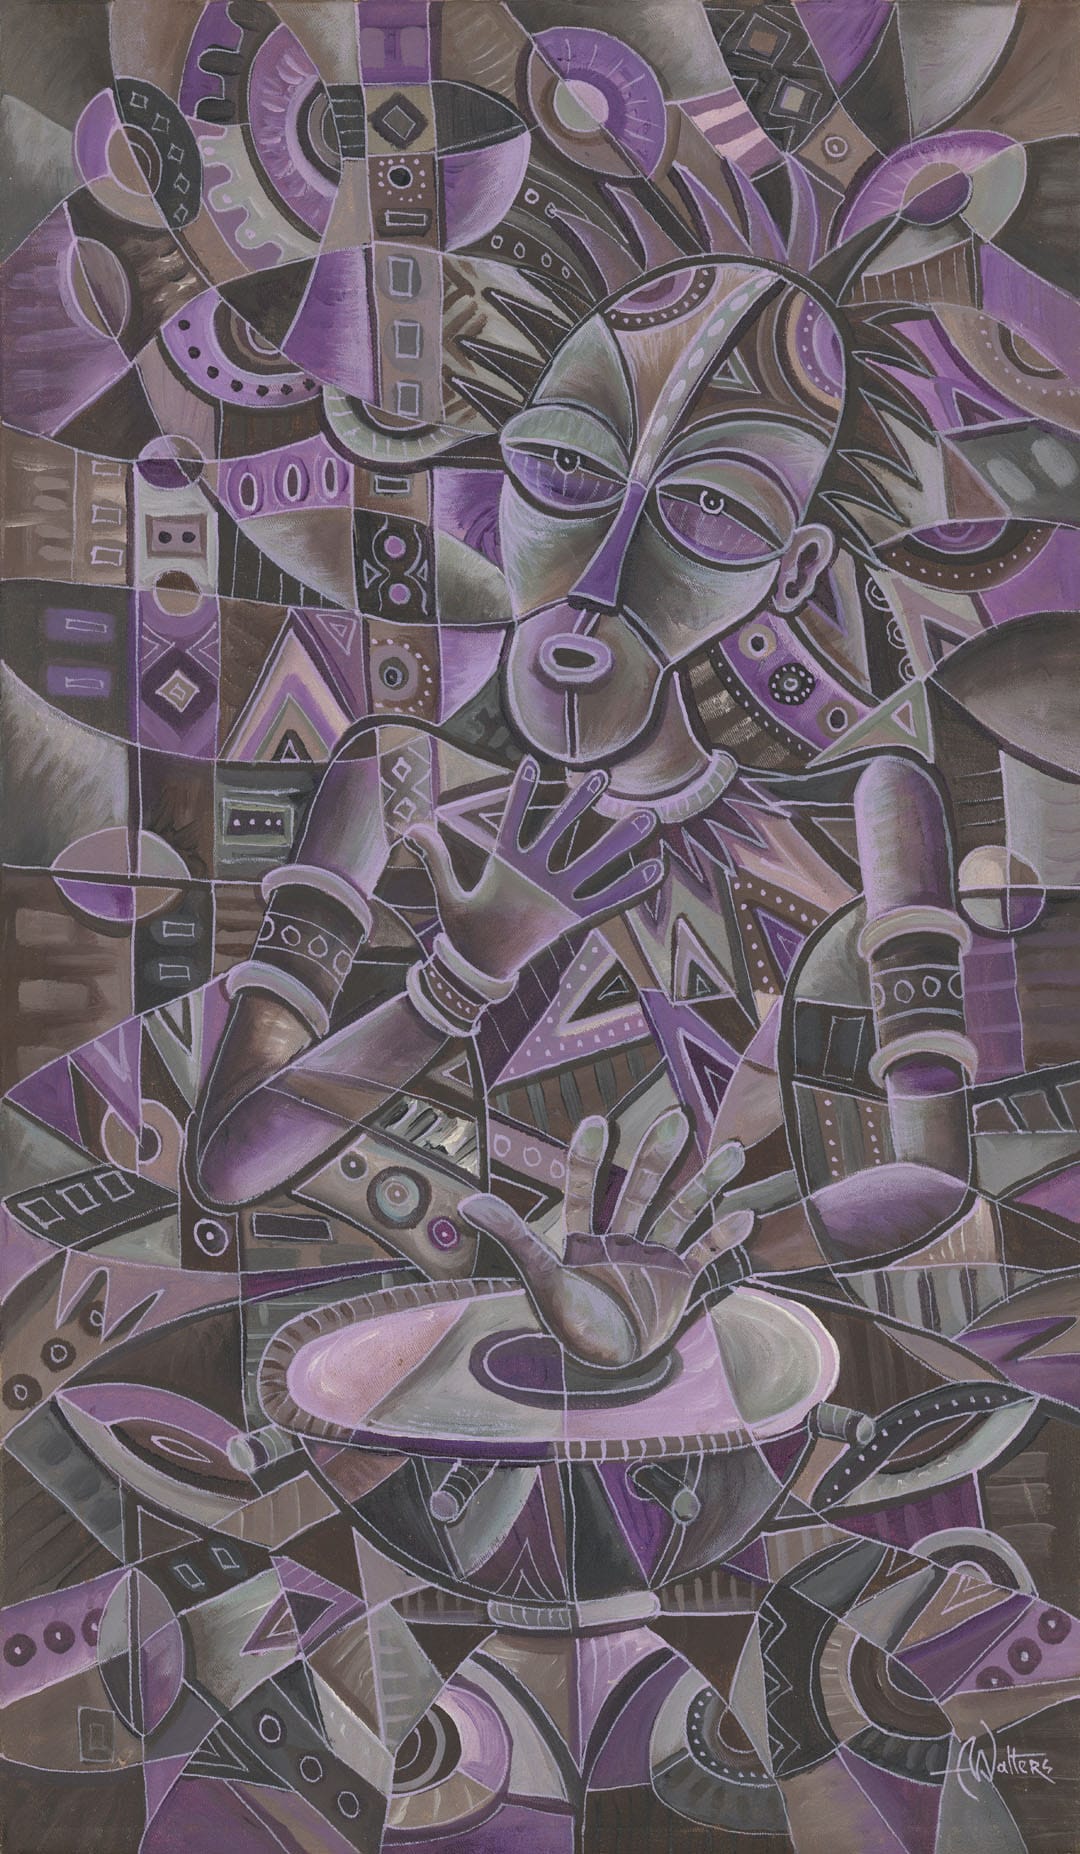 Here is a deliciously dark acrylic painting of an African drummer in violets.